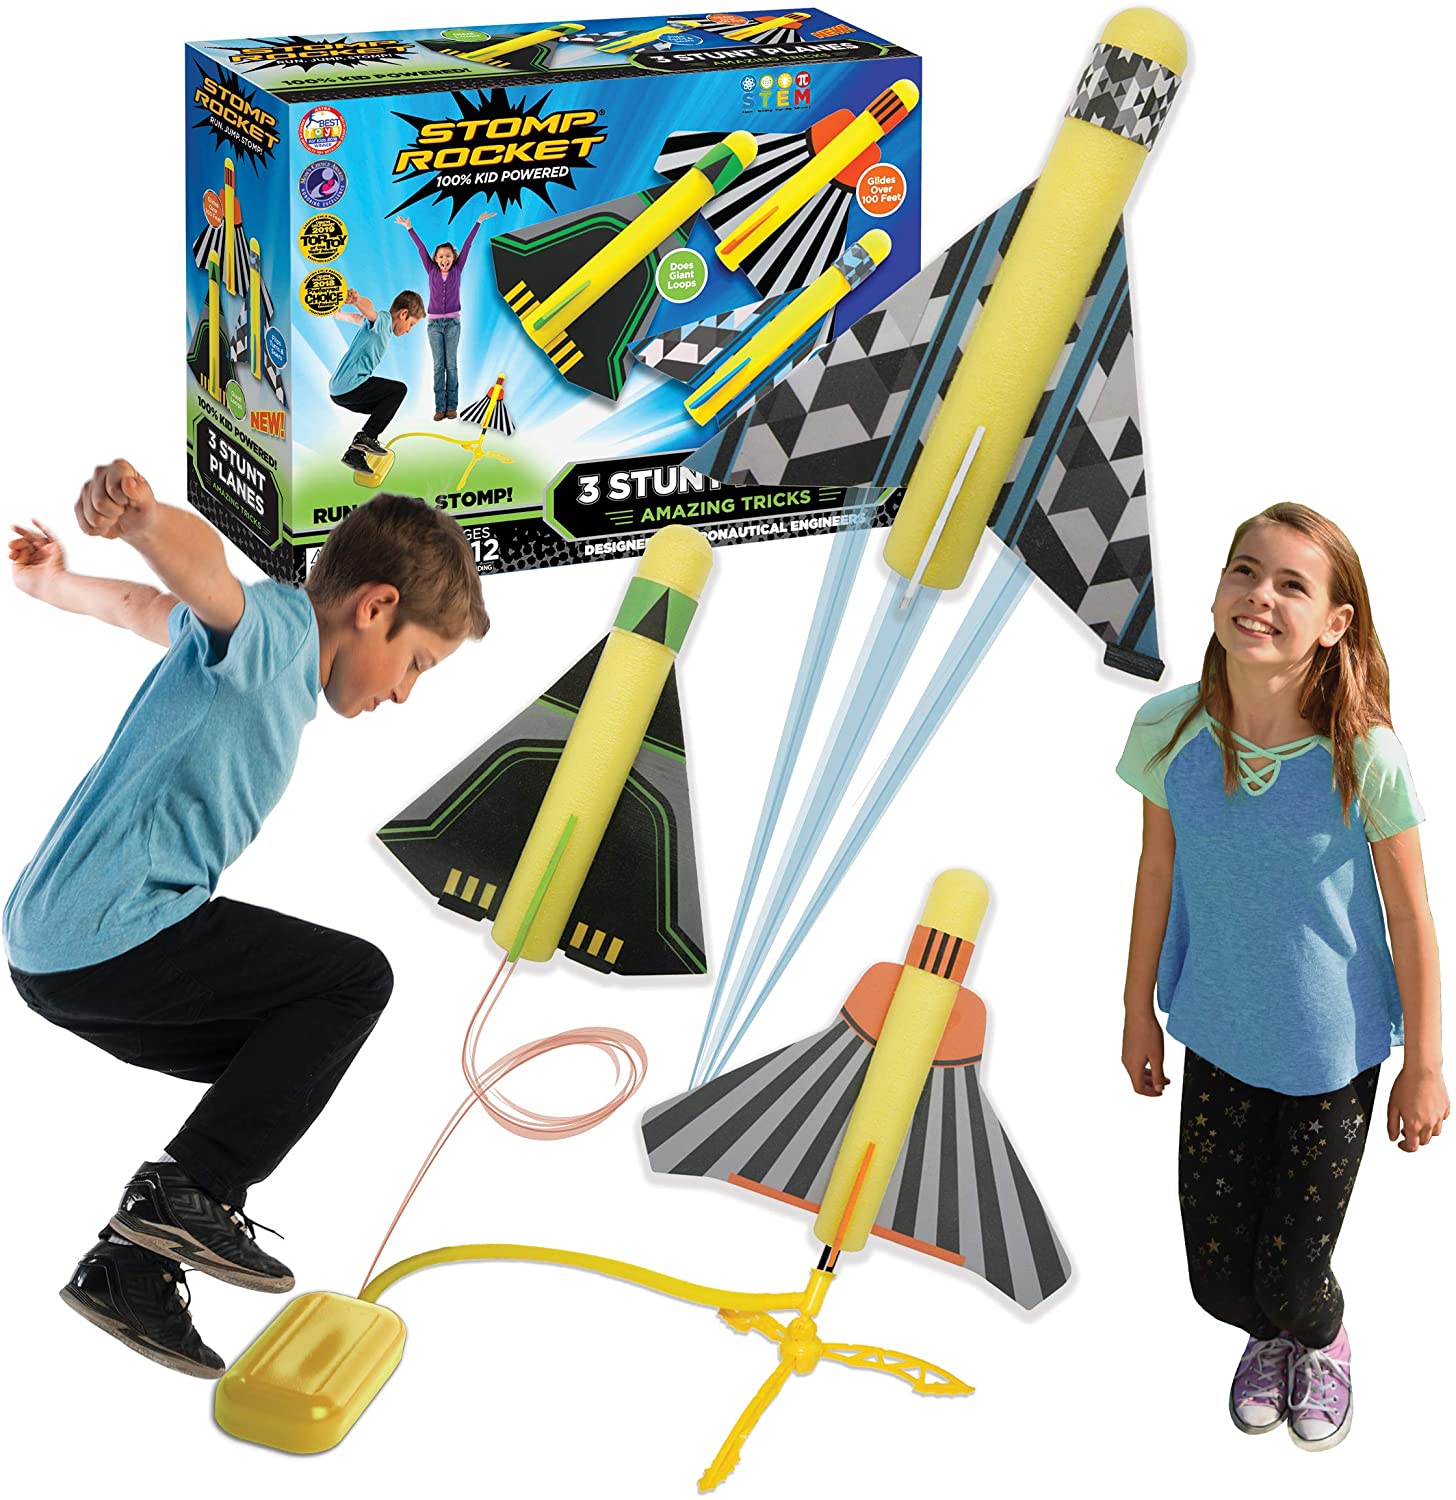 Stomp Rocket Science Stomp Rocket Launcher 6-Year-Old Boy Toy